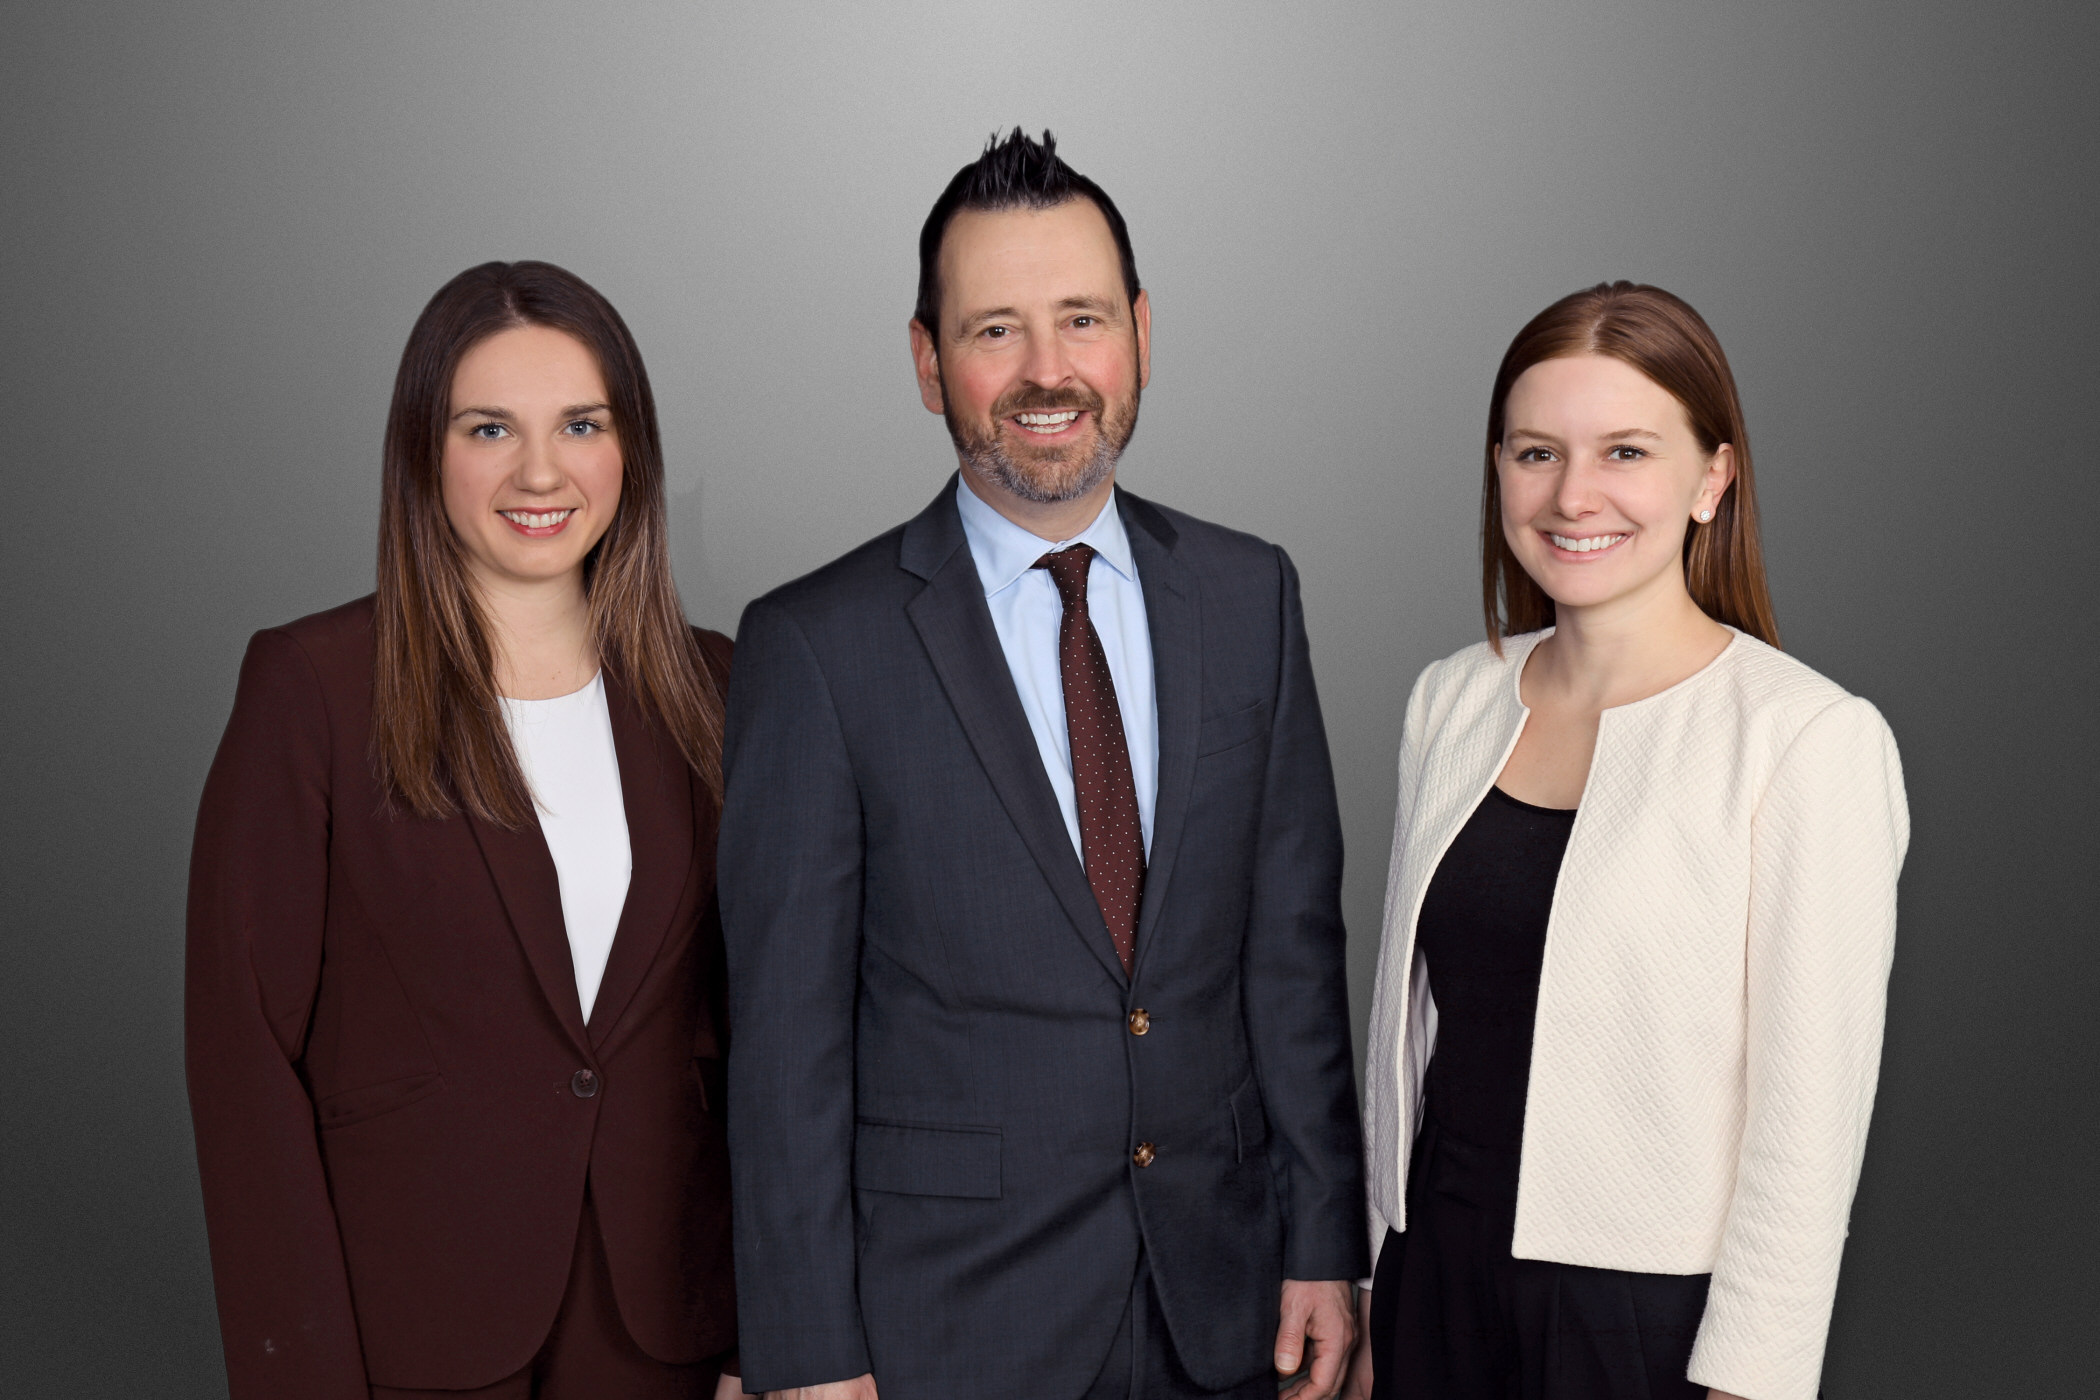 Family Law Group Photo. From left to right: Attorney Kaitlyn Smearcheck, Attorney Thomas Clark, and Attorney Alexandria Ebbert.